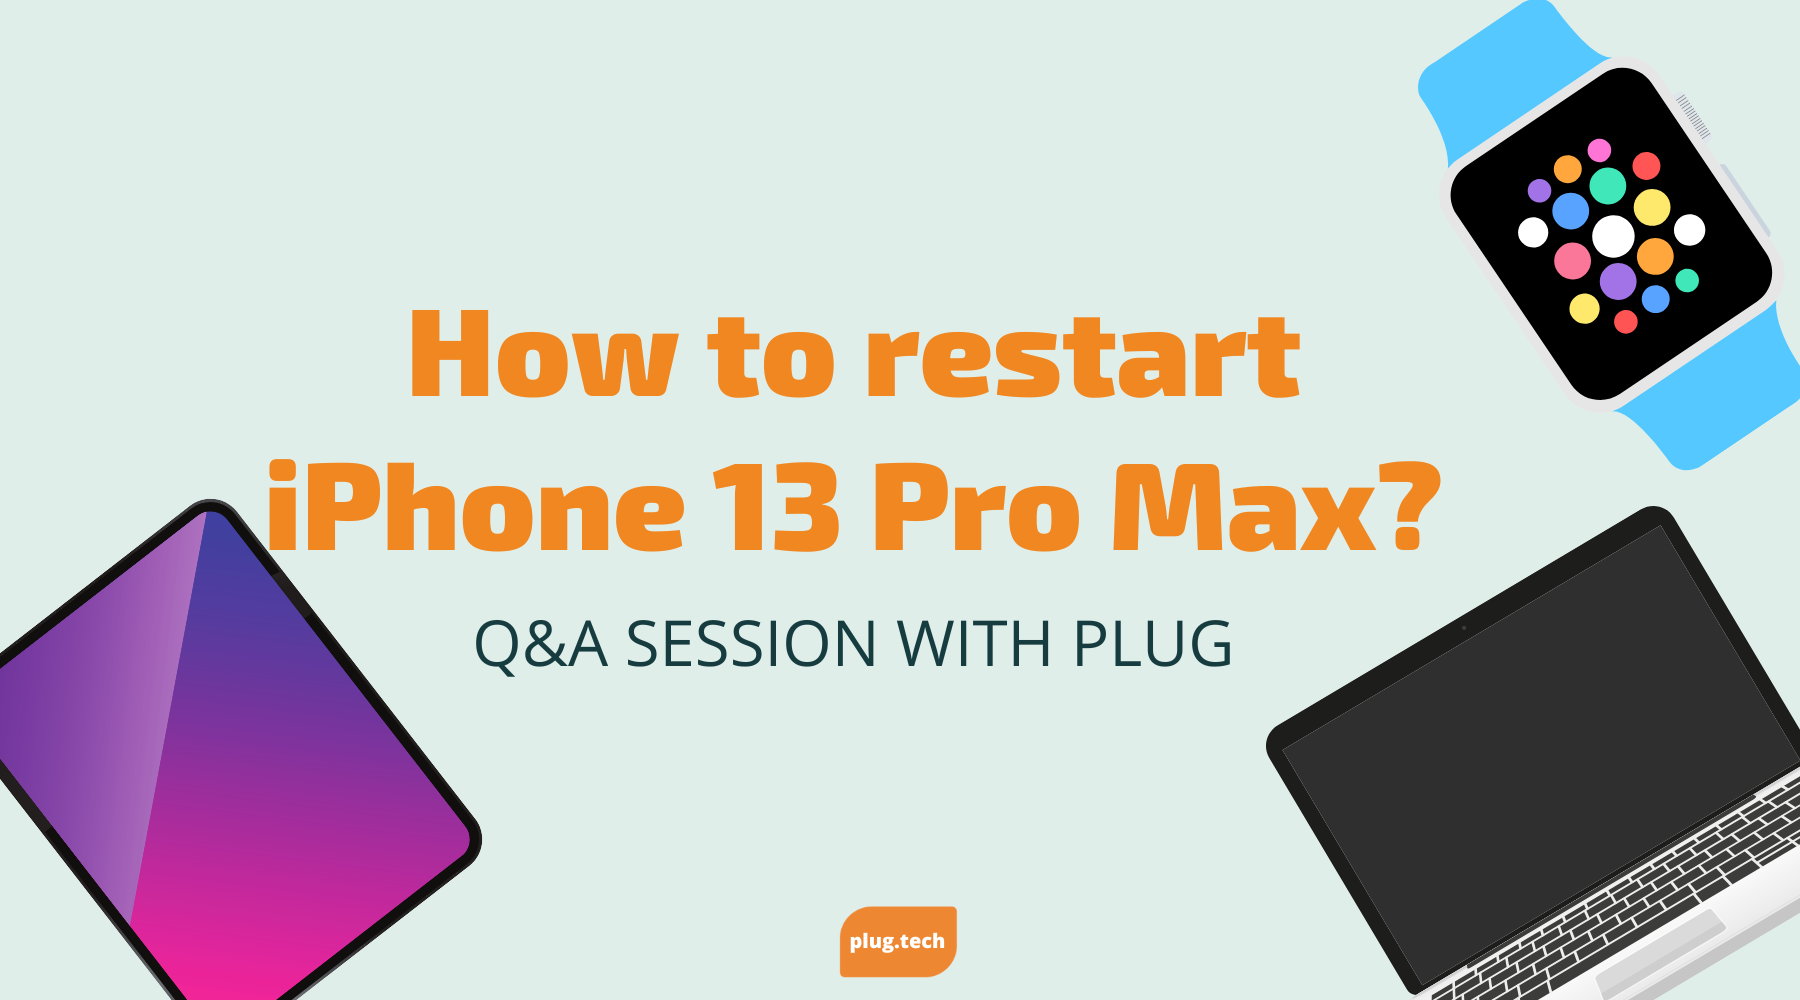 How to restart iPhone 13 Pro Max?